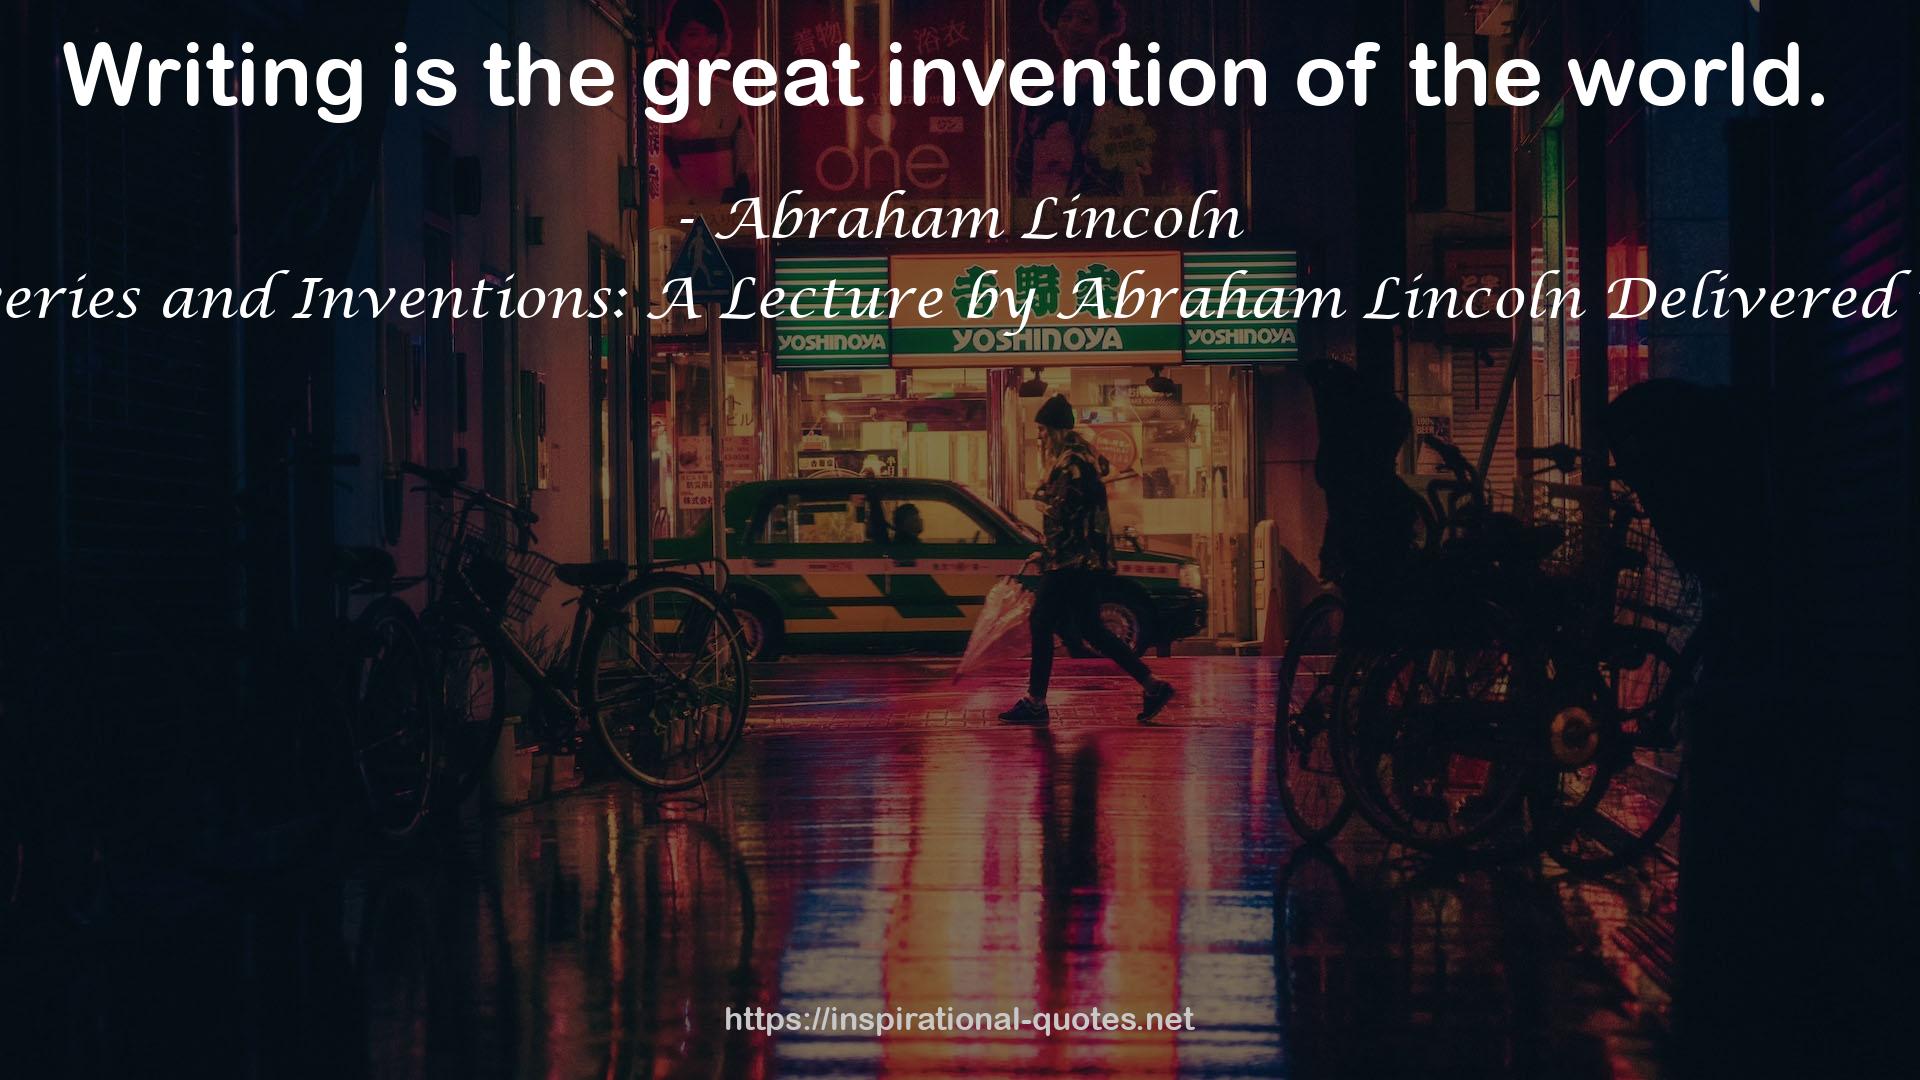 Discoveries and Inventions: A Lecture by Abraham Lincoln Delivered in 1860 QUOTES